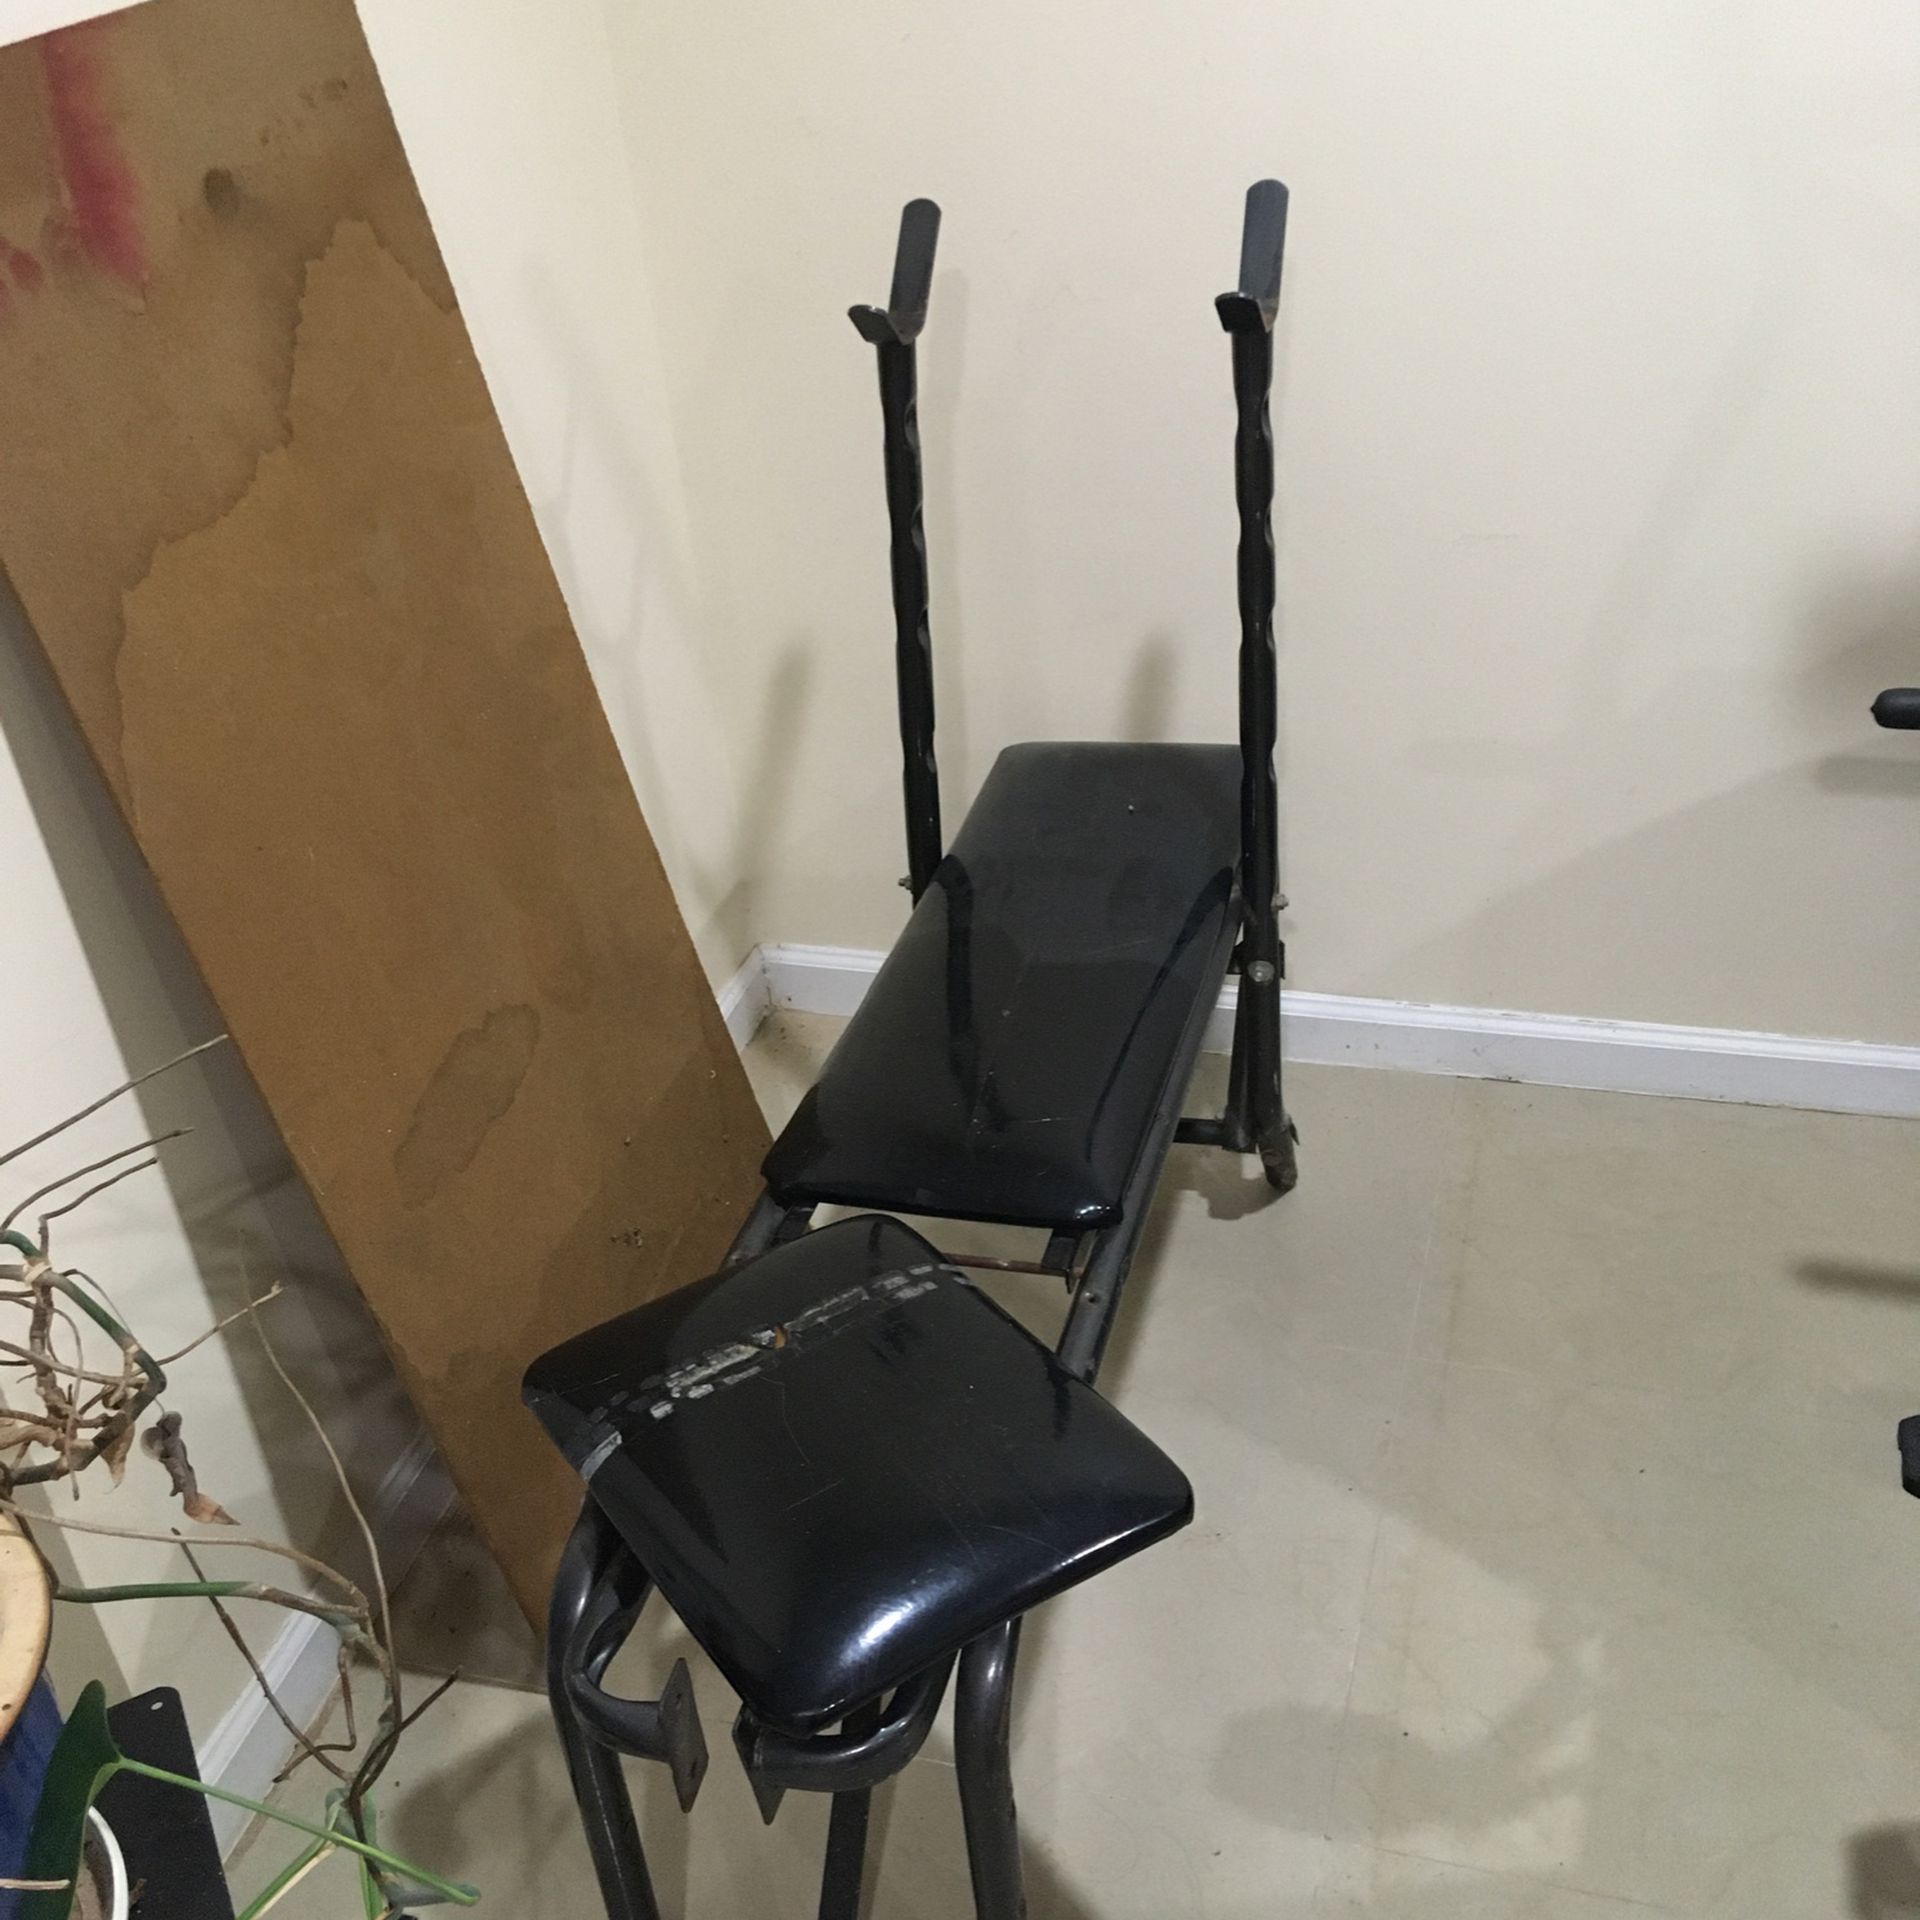 Free Vintage Weight Equipment, Rowing Machine Stationary Bike From The 80’s